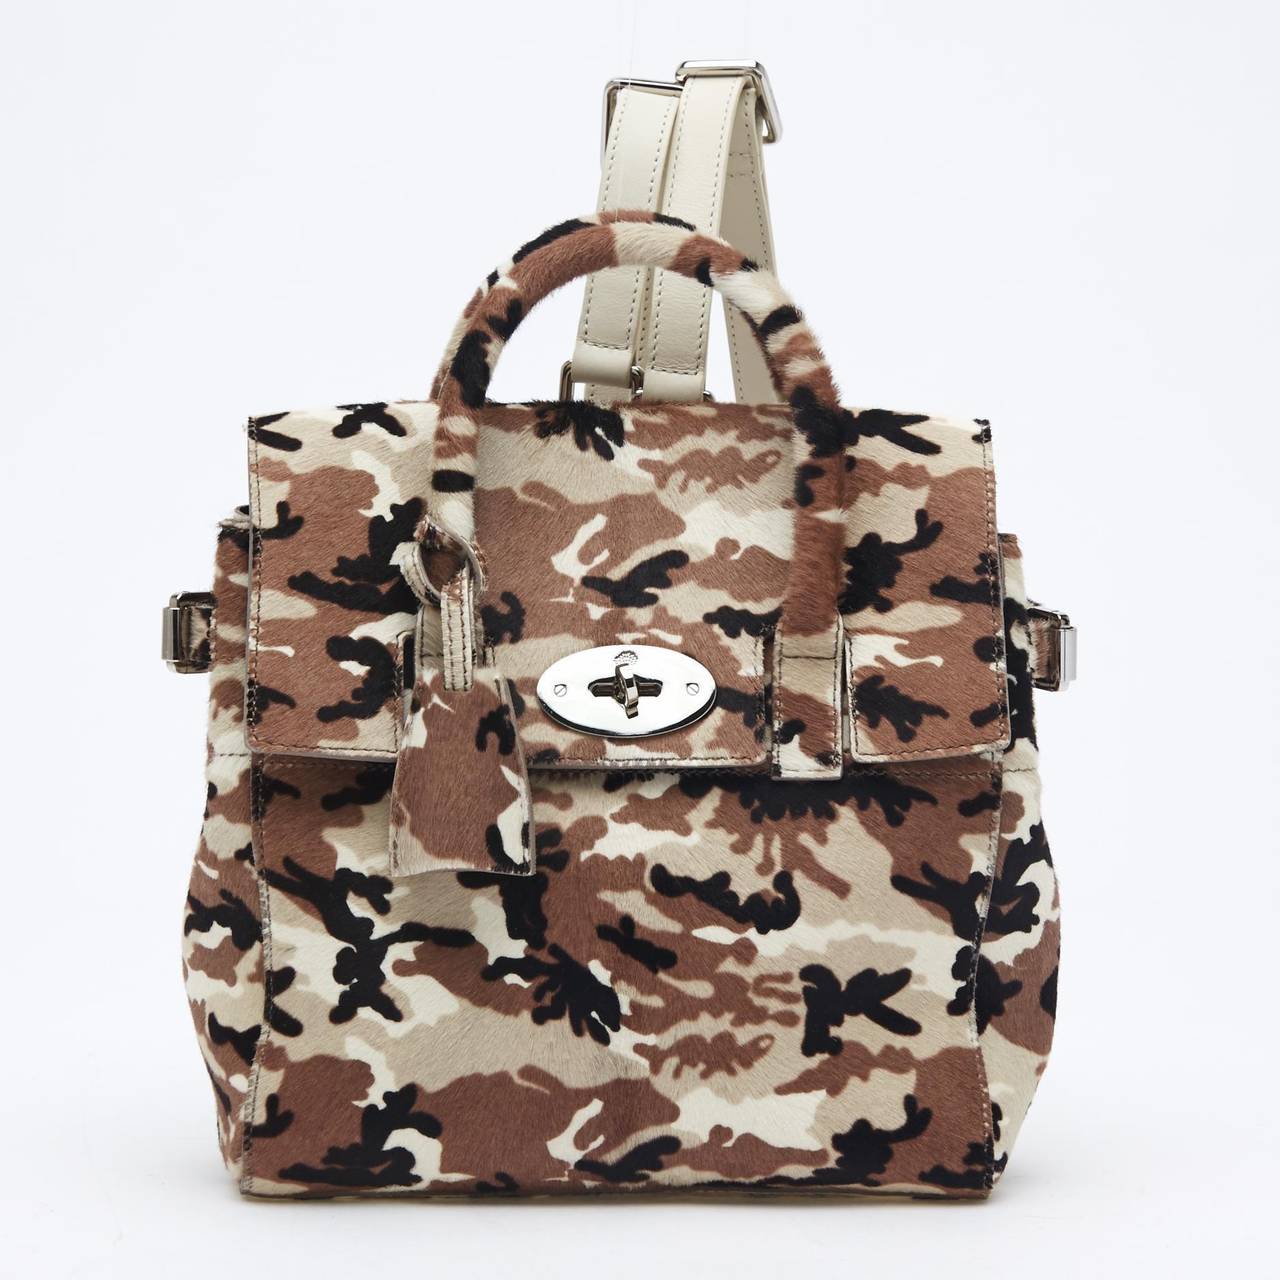 This striking Mulberry Cara Calf Hair Mini is as stylish as Ms. Delevingne herself. This practical-yet-eccentric bag is quite versatile. It can be worn with its removable backpack straps, on the shoulder, or by its handle. The camouflage print makes